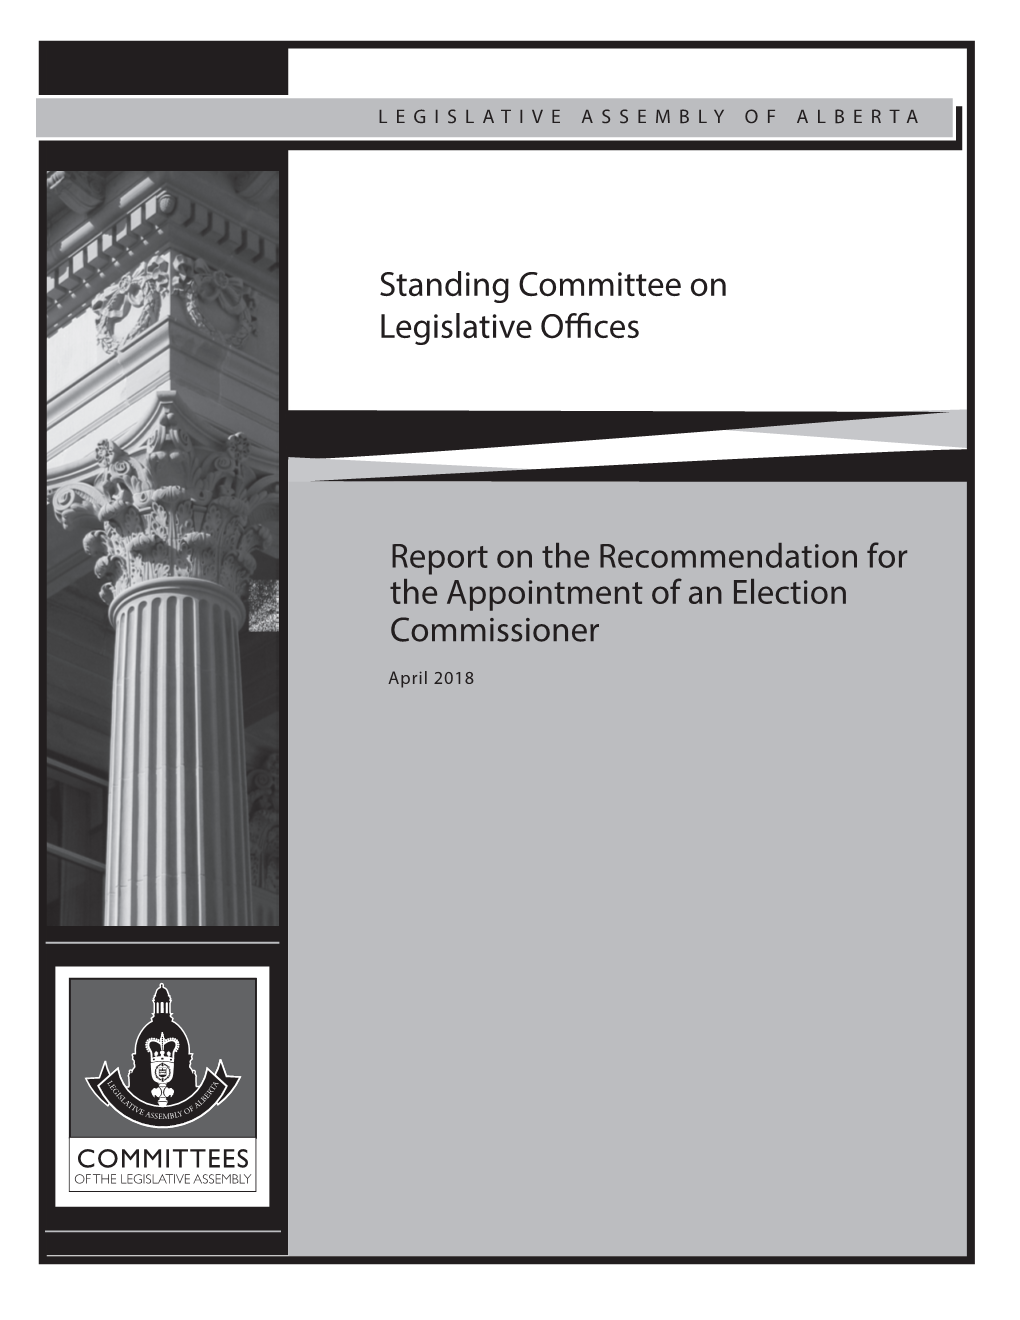 Election Commissioner Recommendation Report